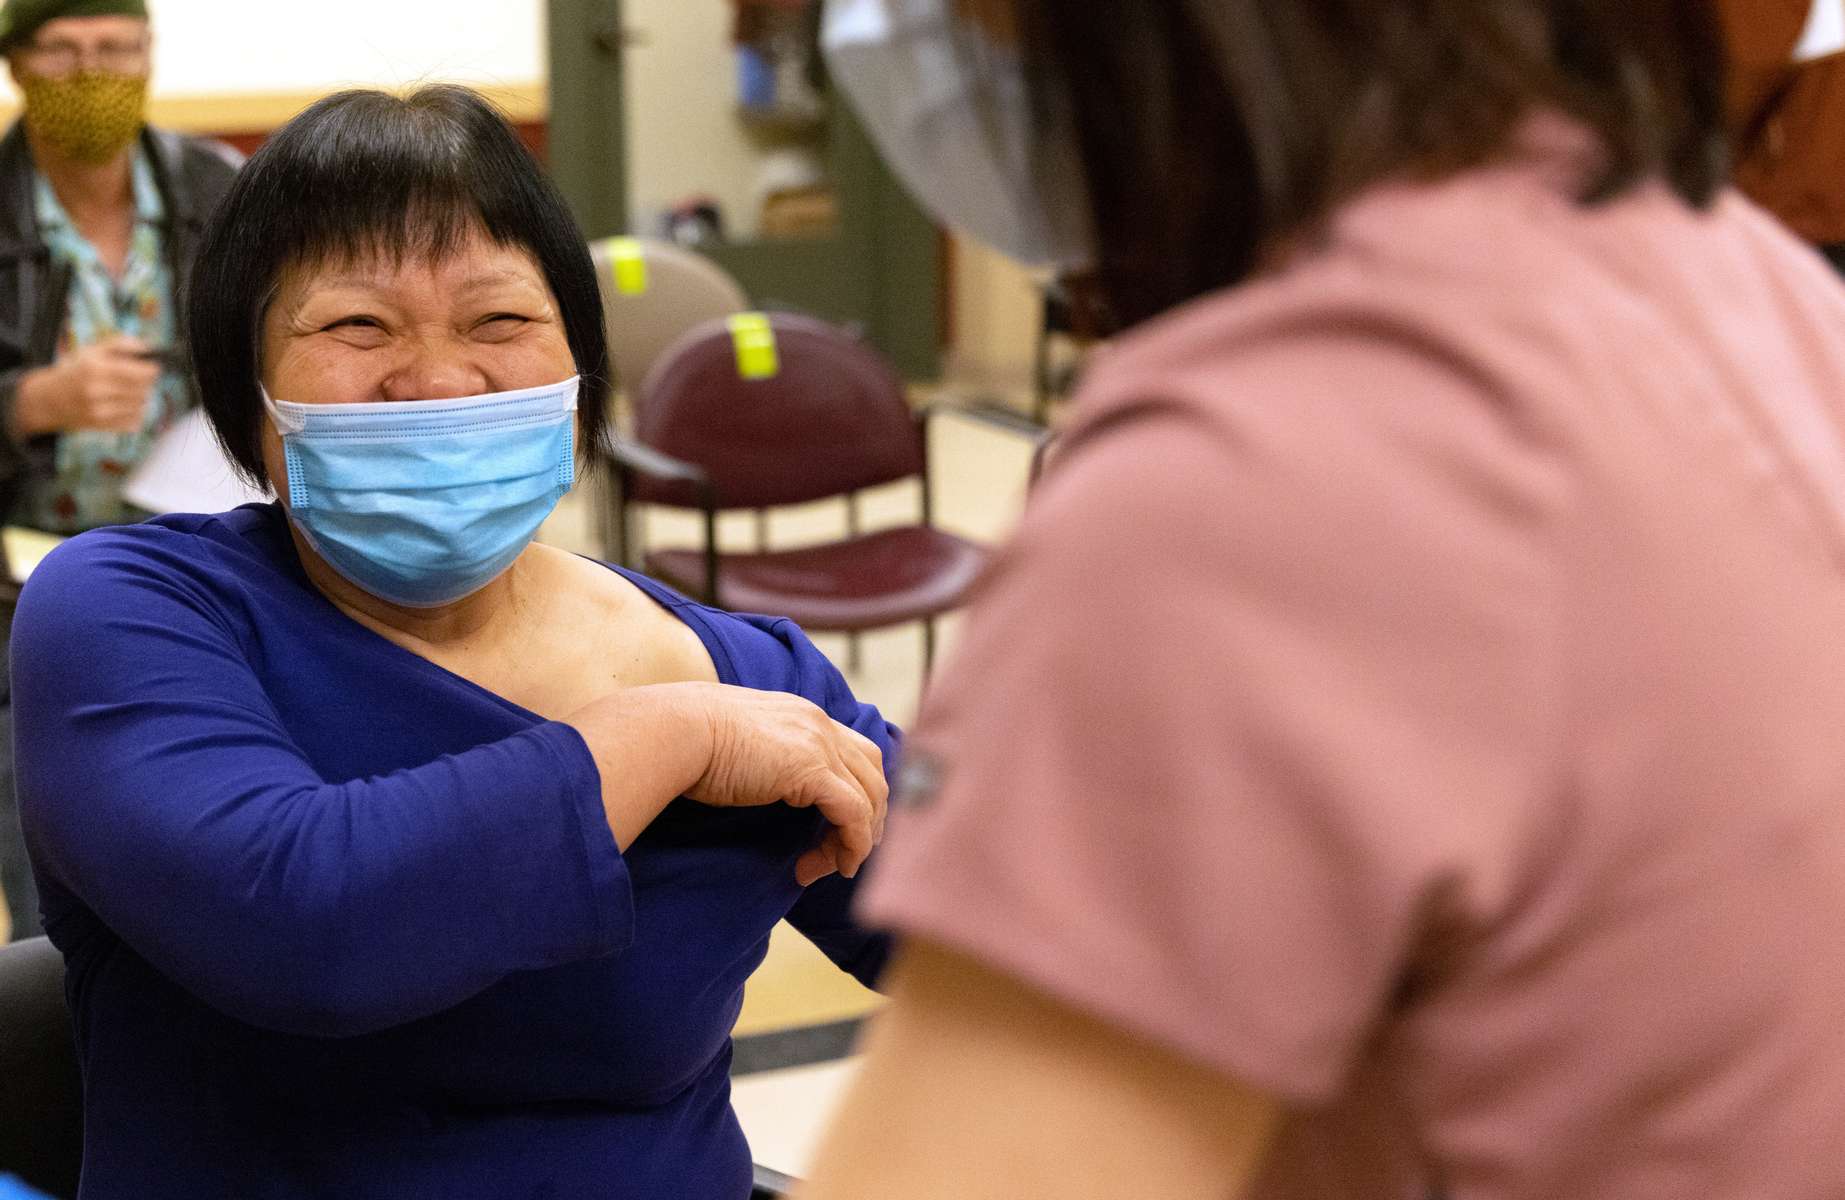 Kuang Suying, age 60, who works in a noodle factory in the Chinatown-International District, reacts after getting a Covid-19 vaccination shot at a pop-up clinic run by the International Community Health Services at the Bush Asia Center in Seattle, Wash. on March 18, 2021. (Photo but Karen Ducey)